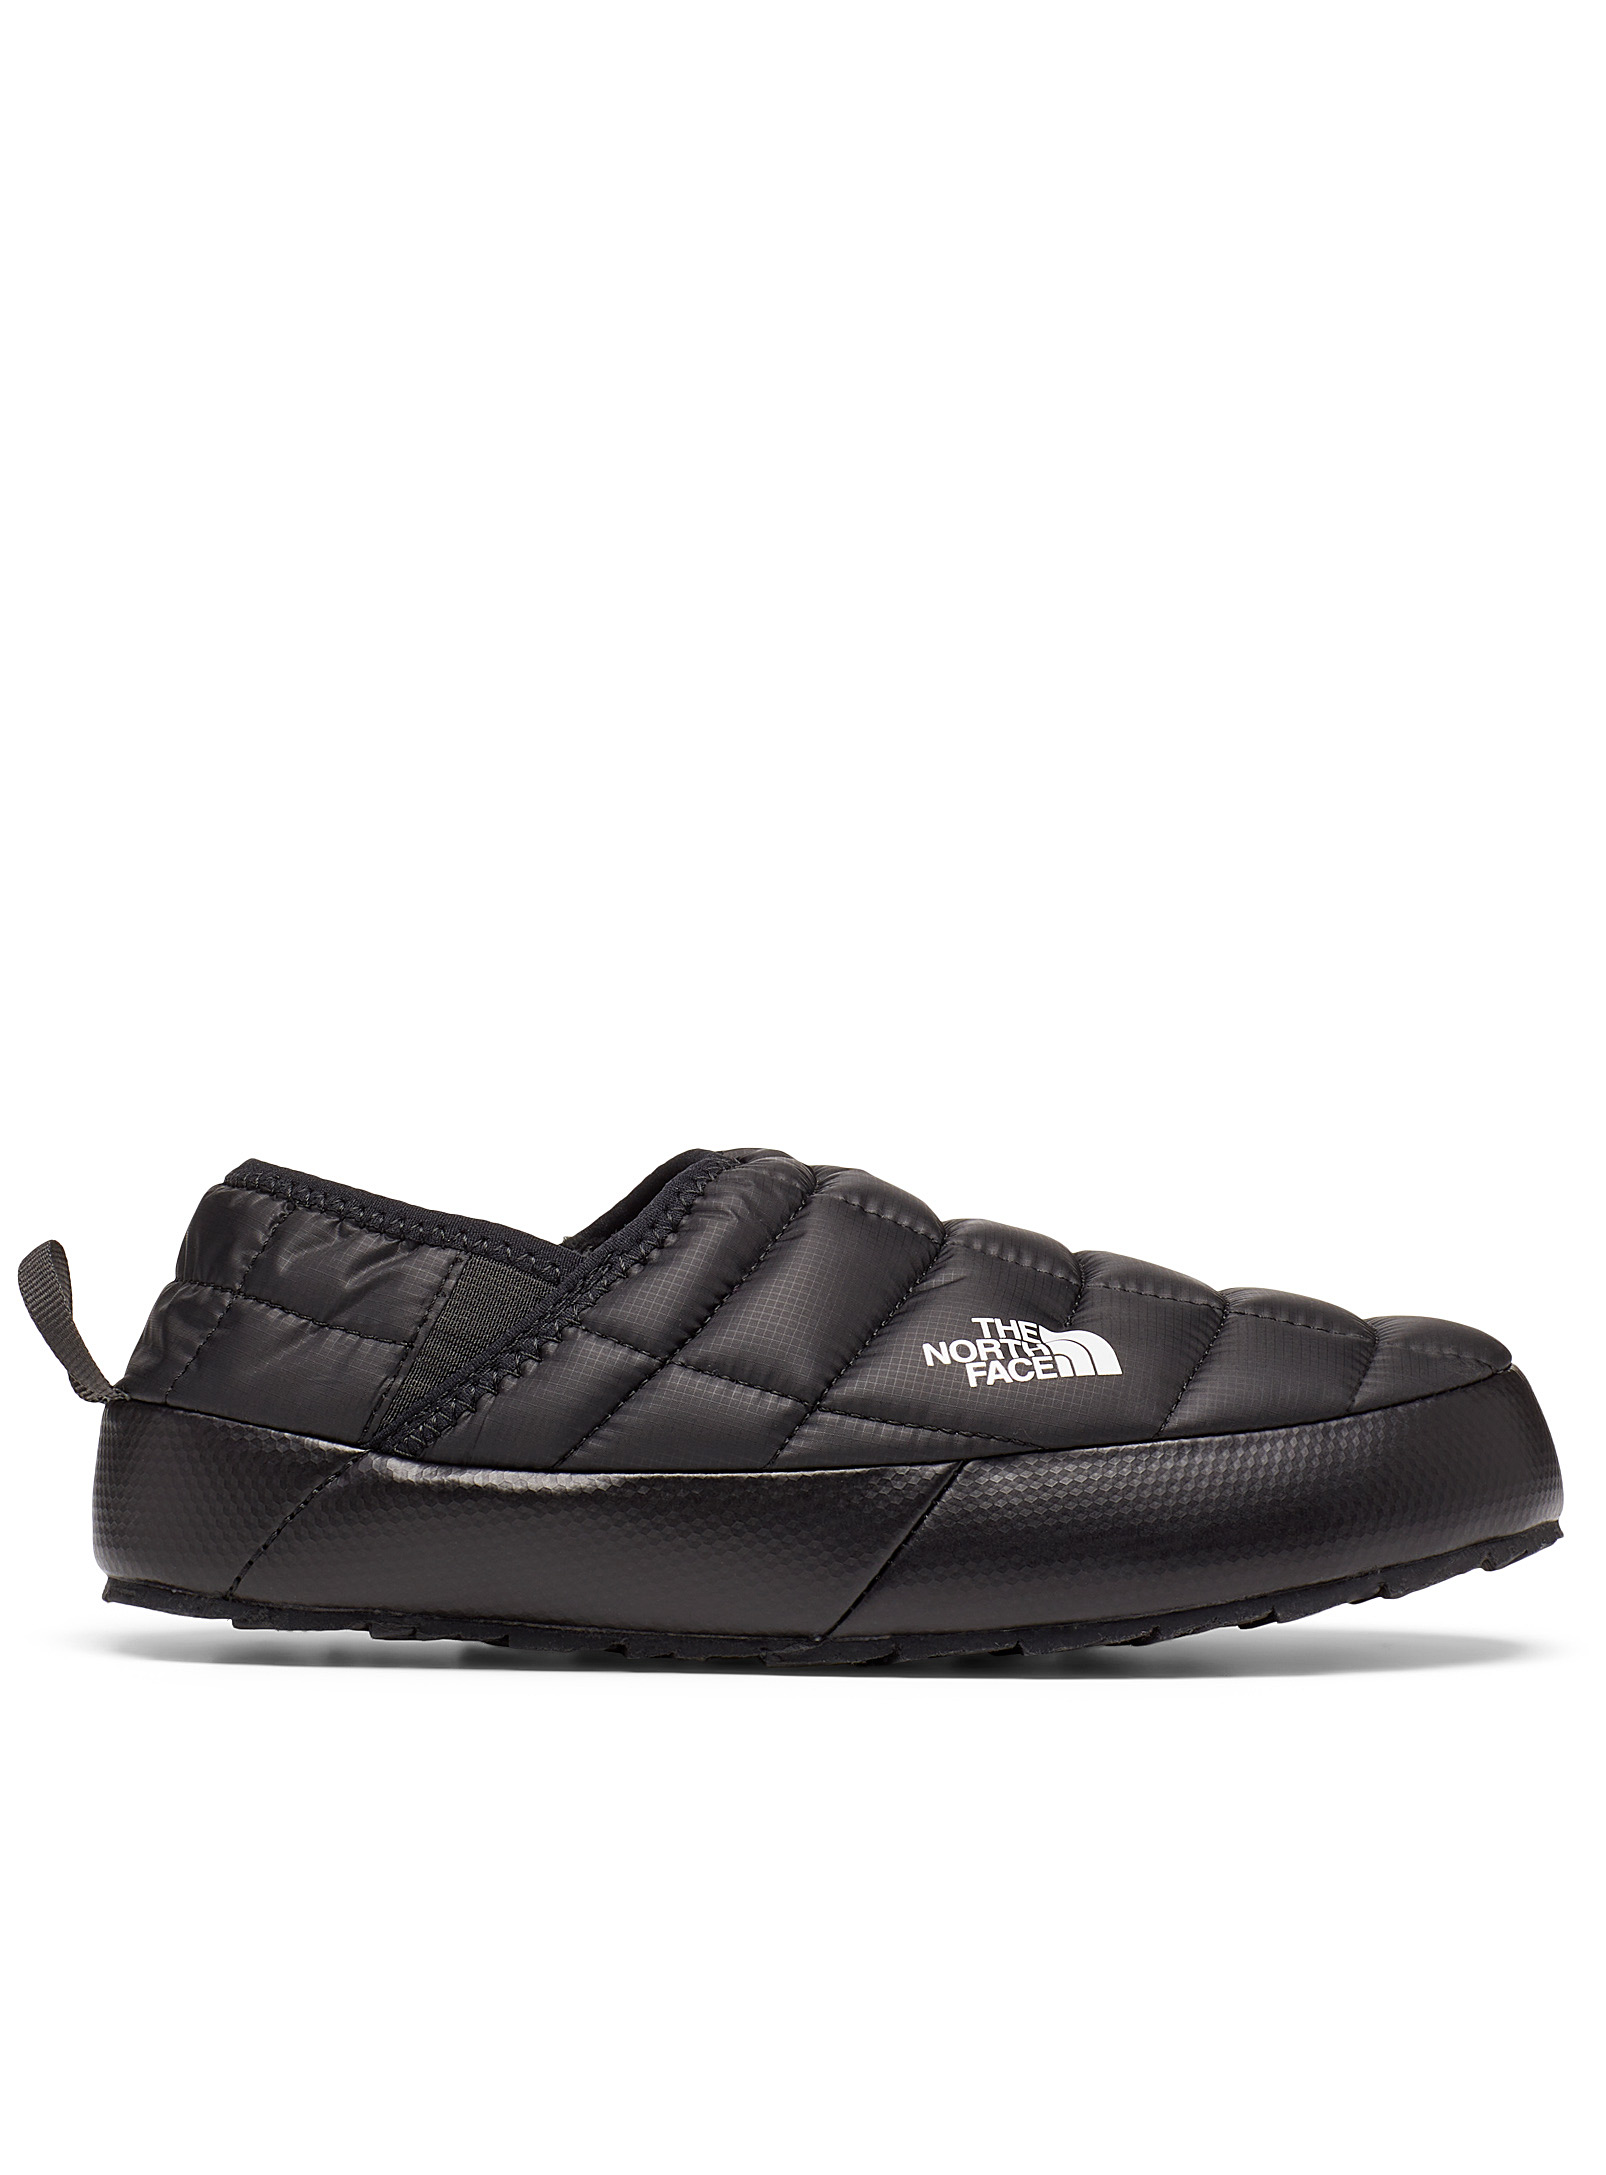 The North Face - Women's ThermoBall Traction V mule slippers Women